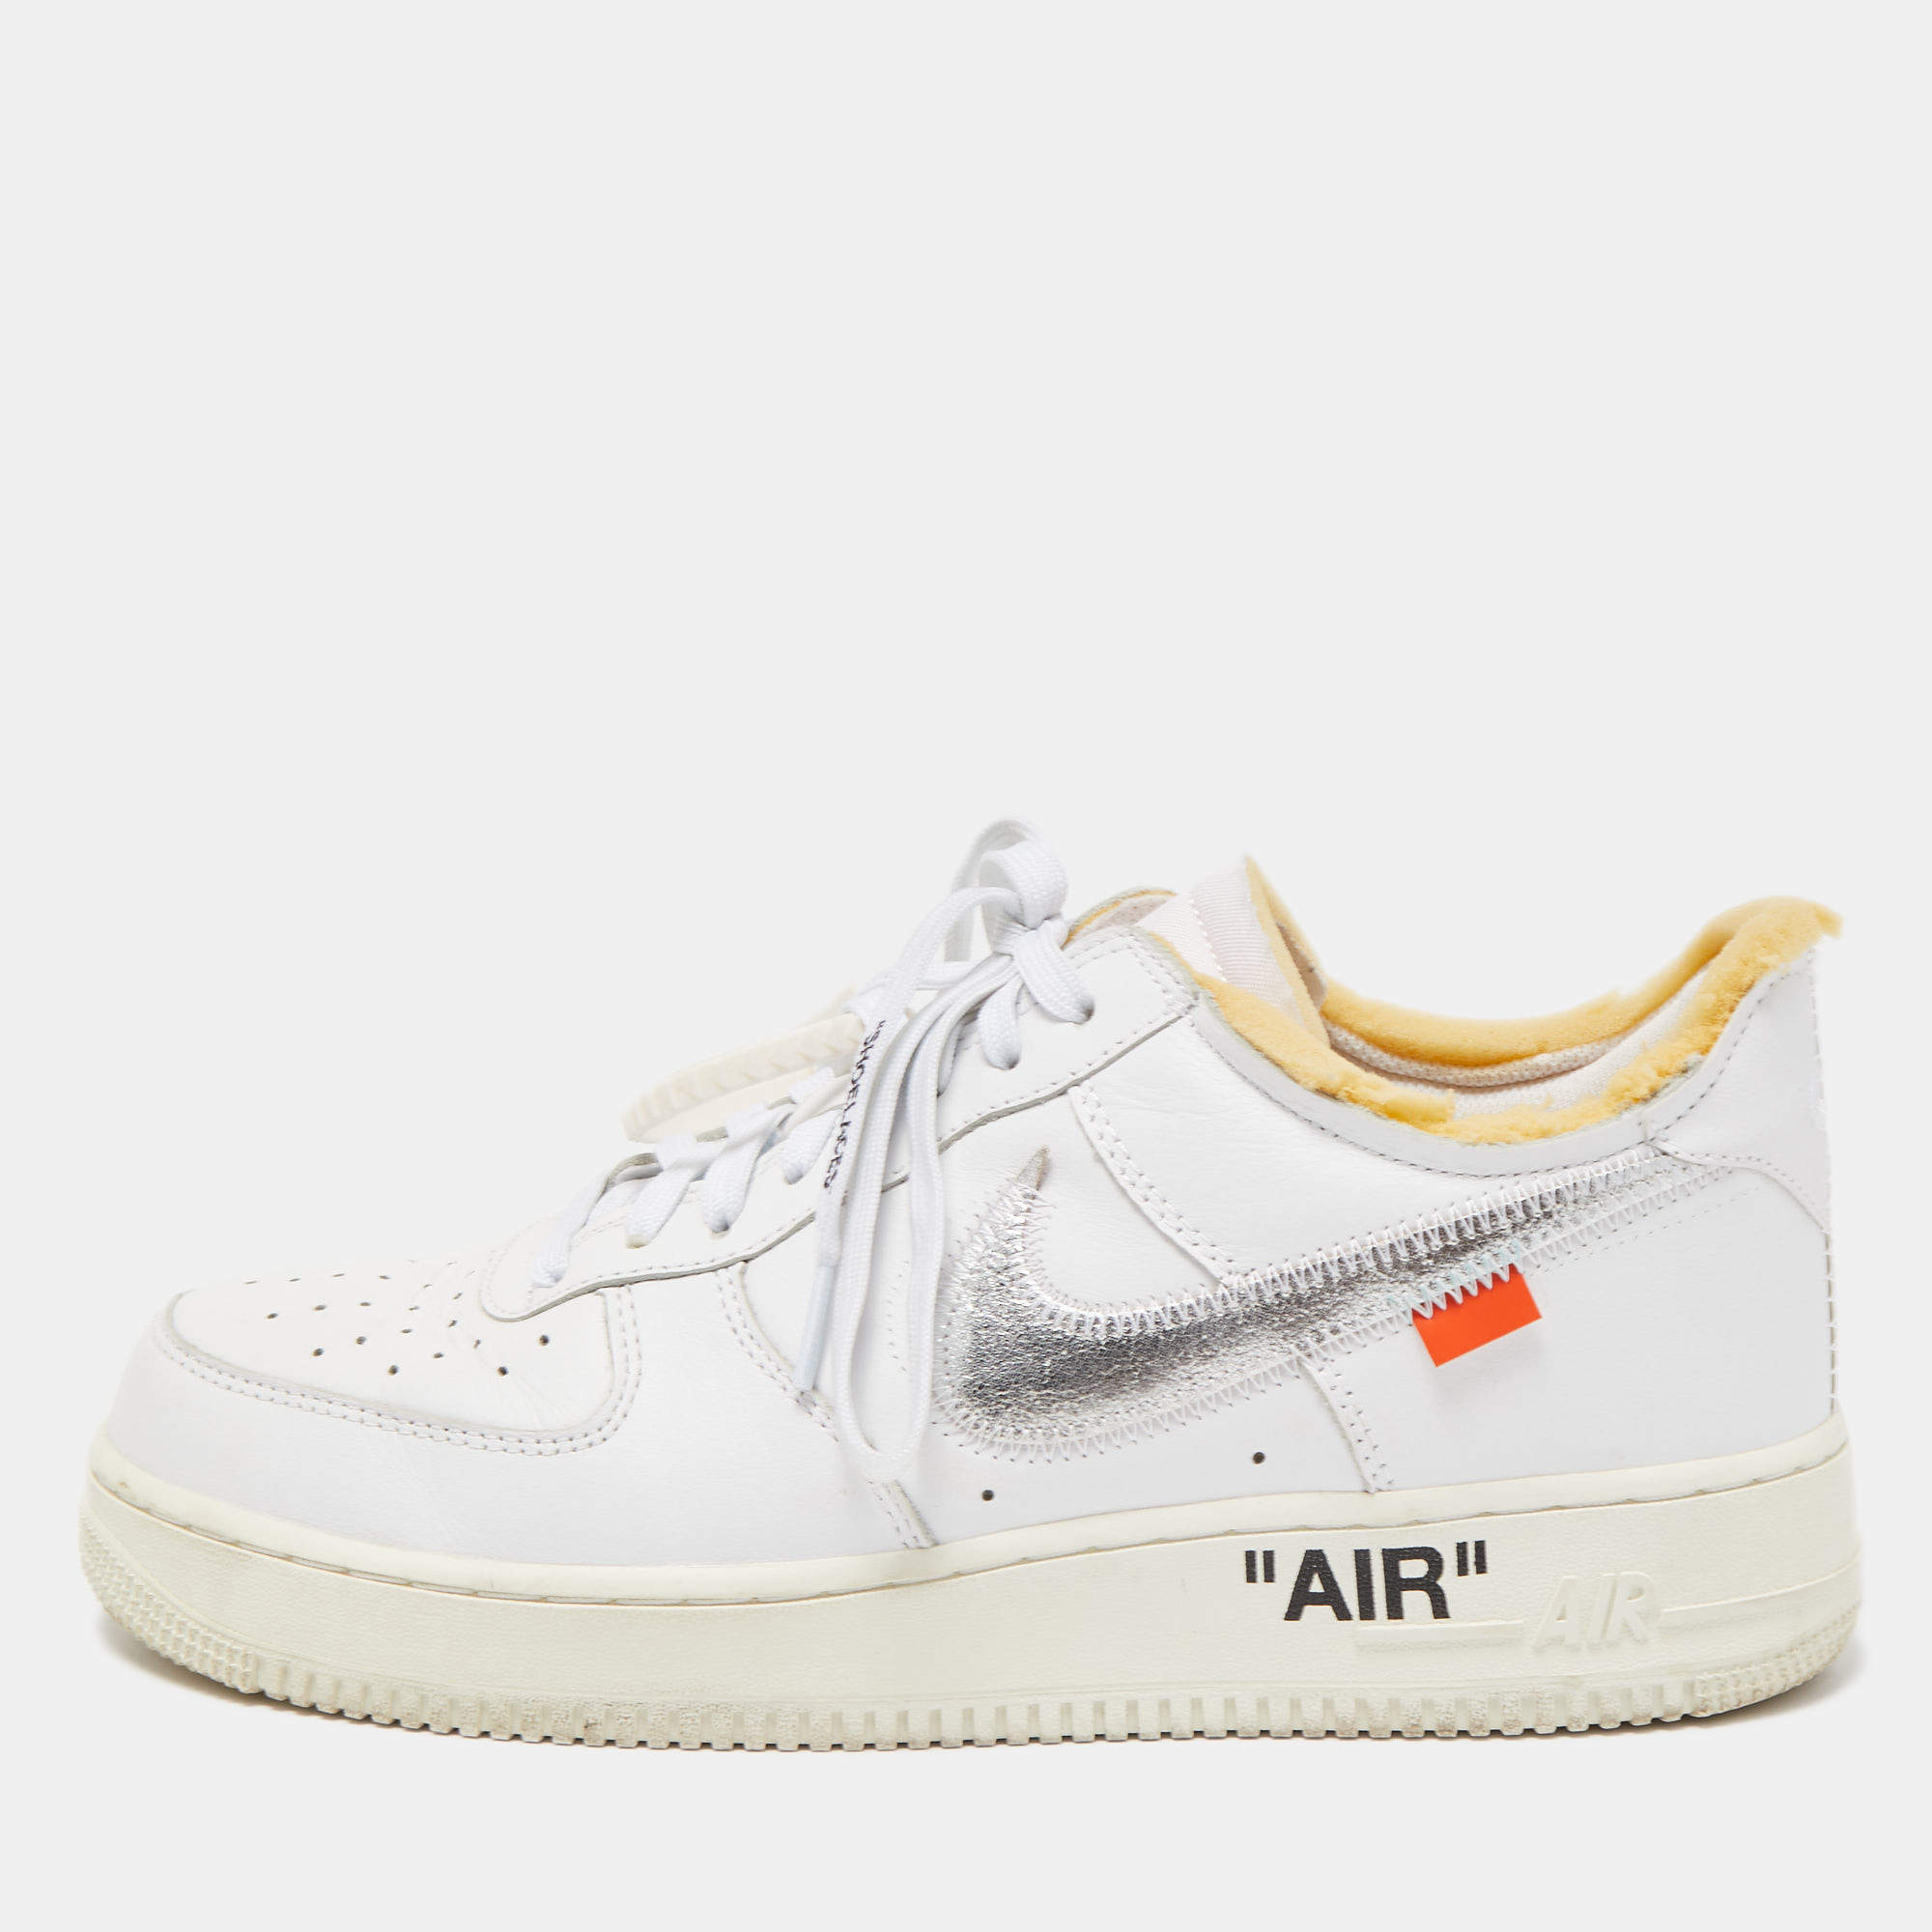 Nike AirForce 1 Off White